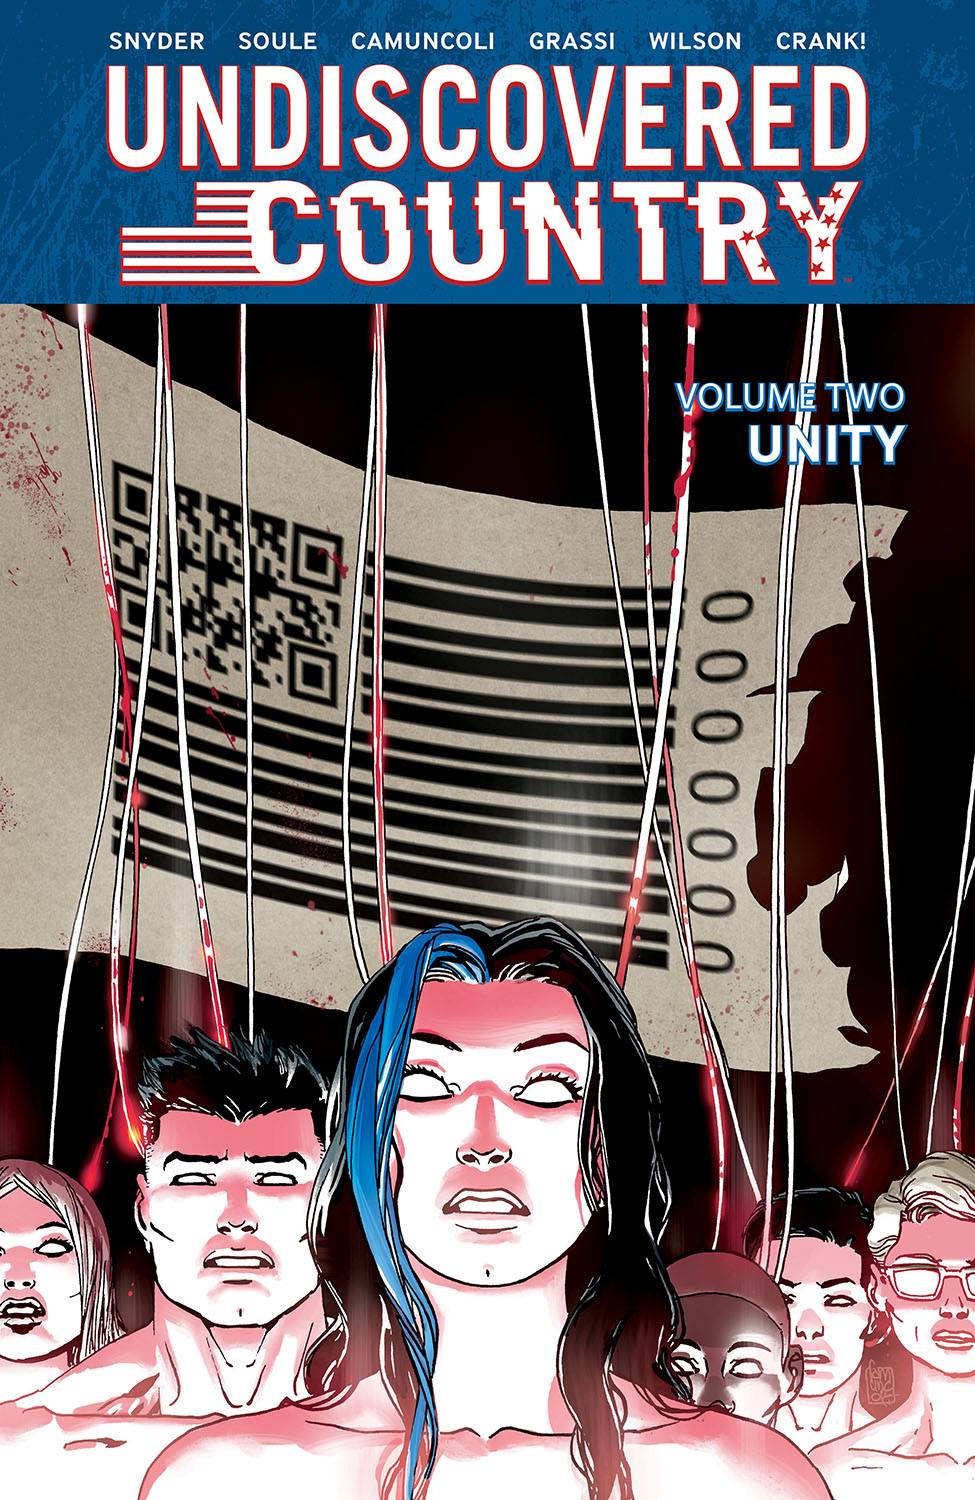 Undiscovered Country TPB Vol 2 Unity